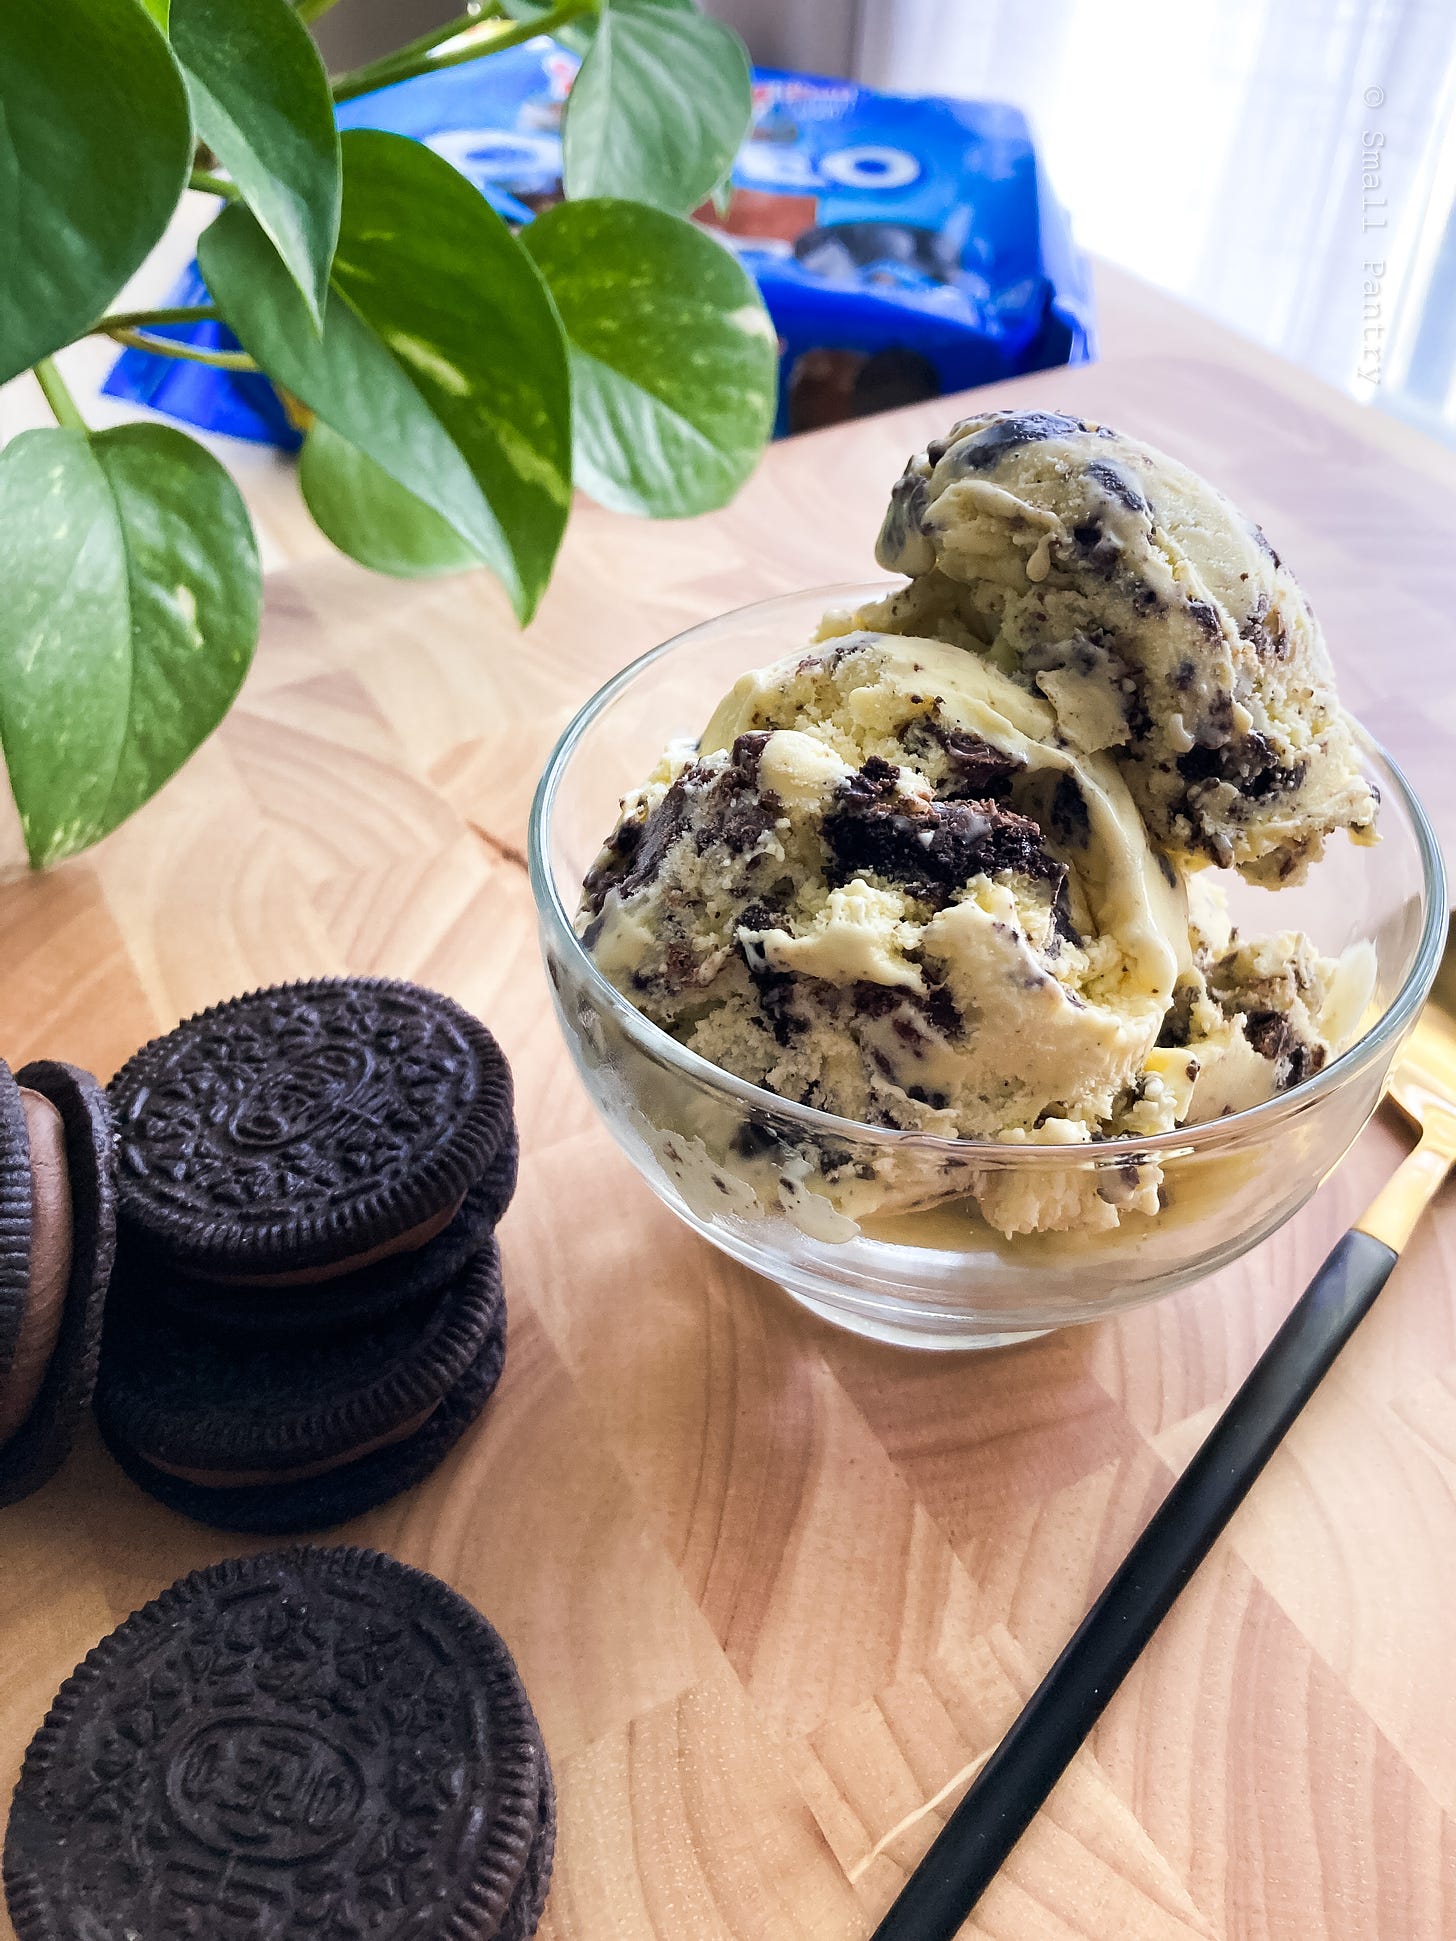 Small bowl of ice cream next to a pile of cookies, with a blue oreo package in the background.